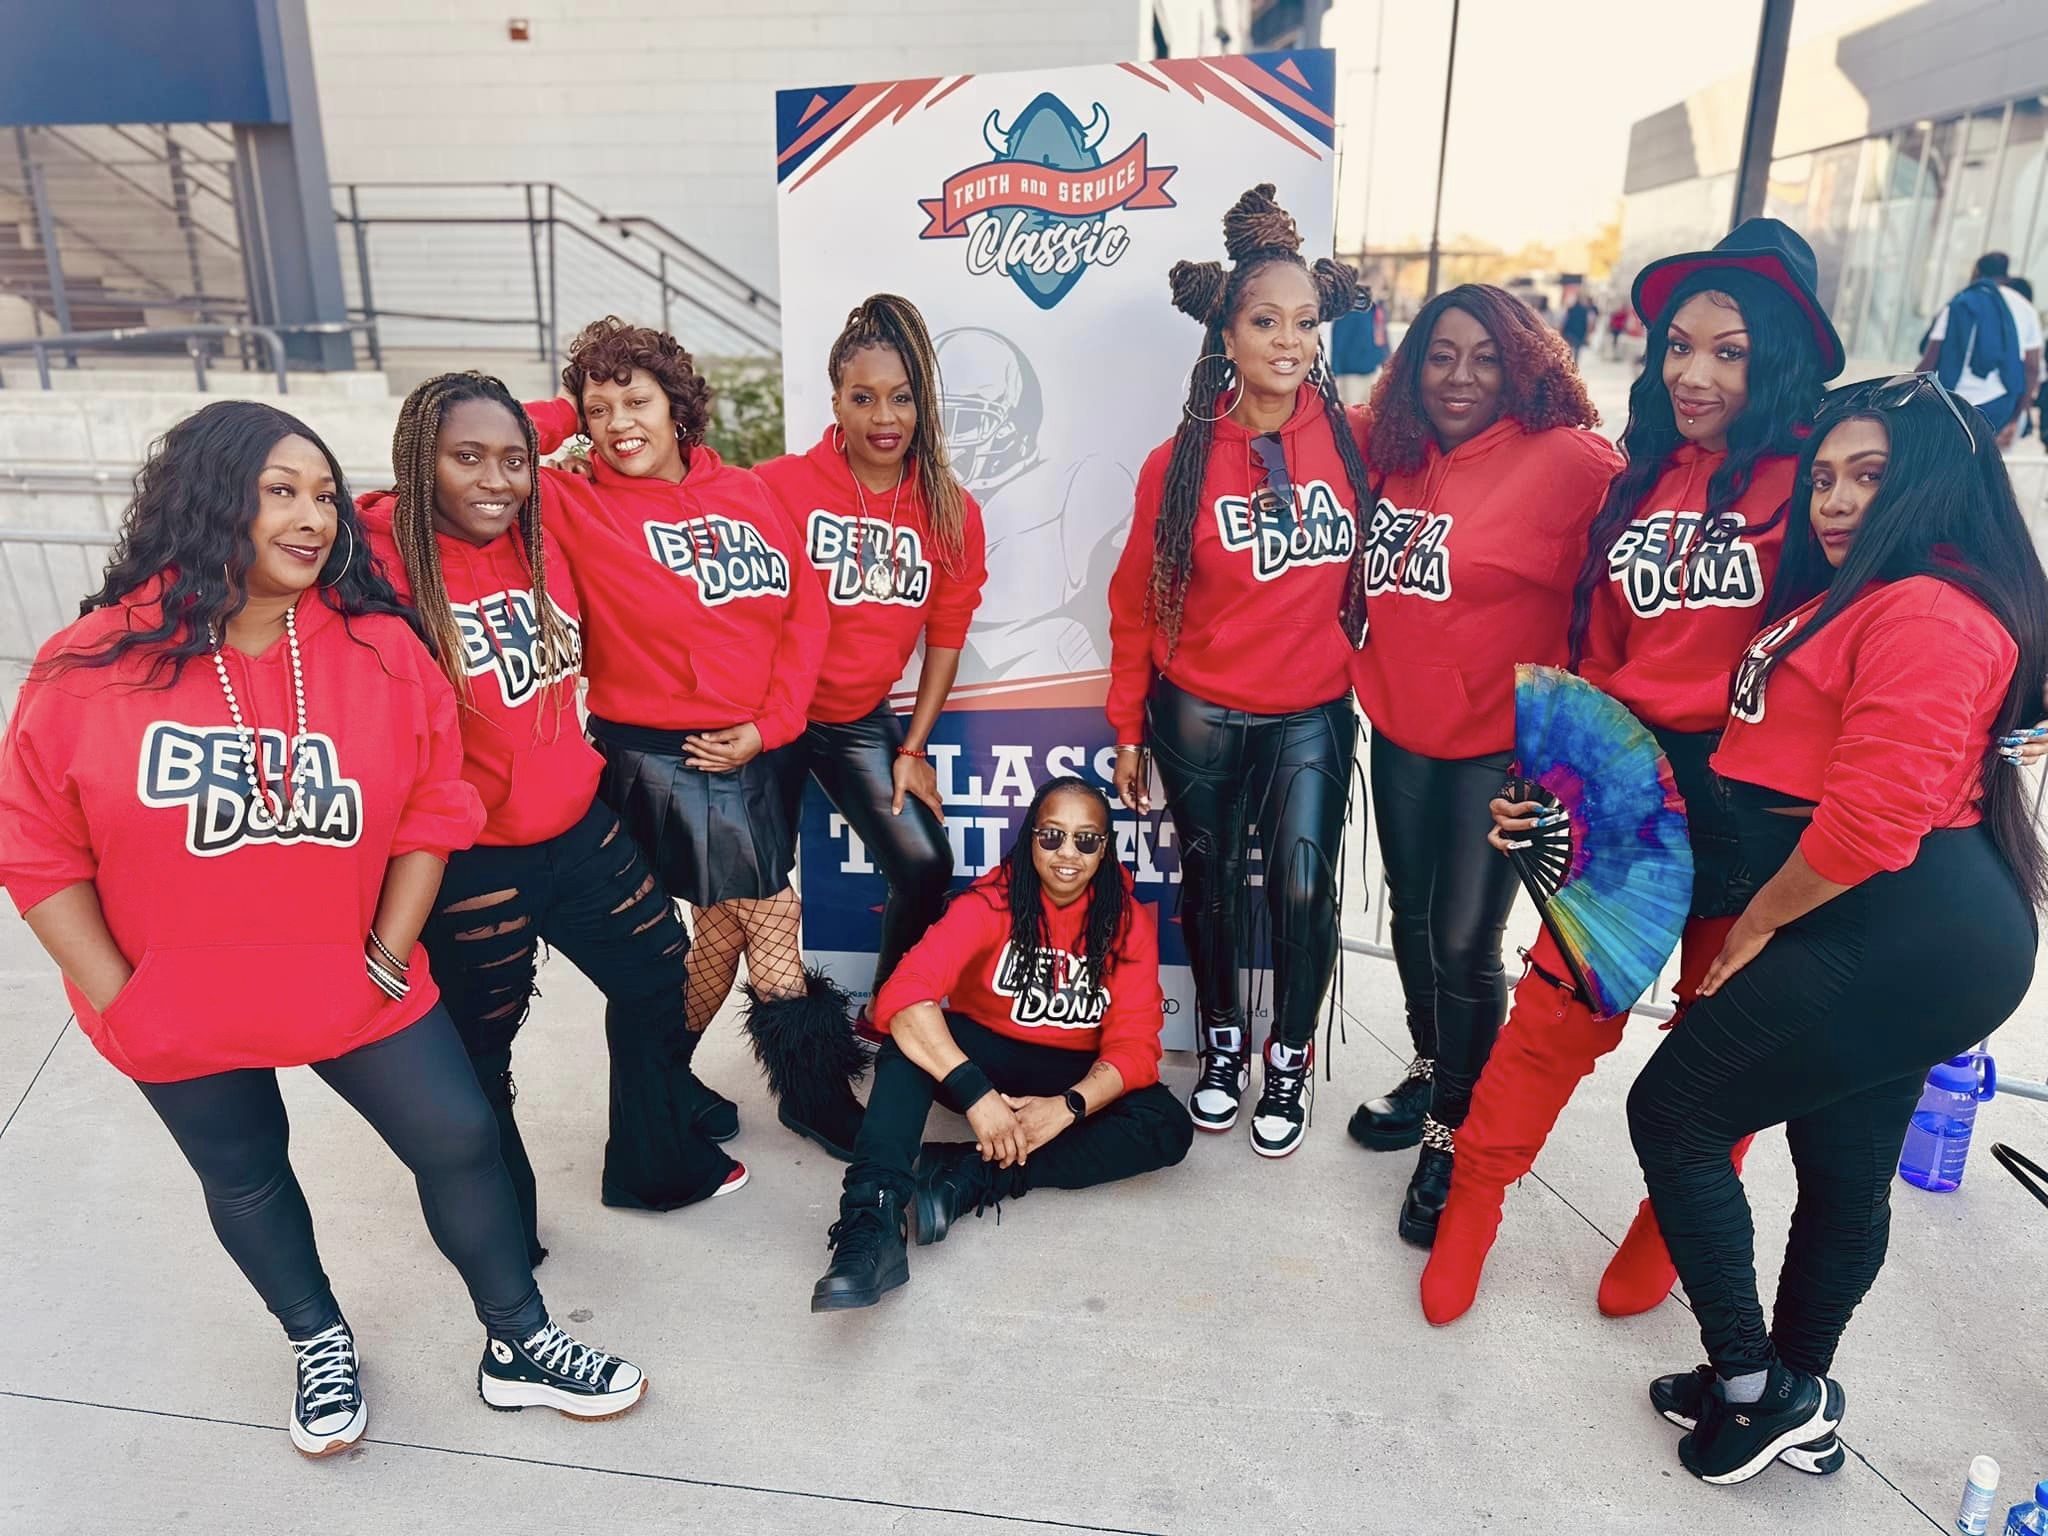 Nine medium-skinned women pose together wearing matching red sweatshirts with "Be'la Dona" printed on them in black and white letters.